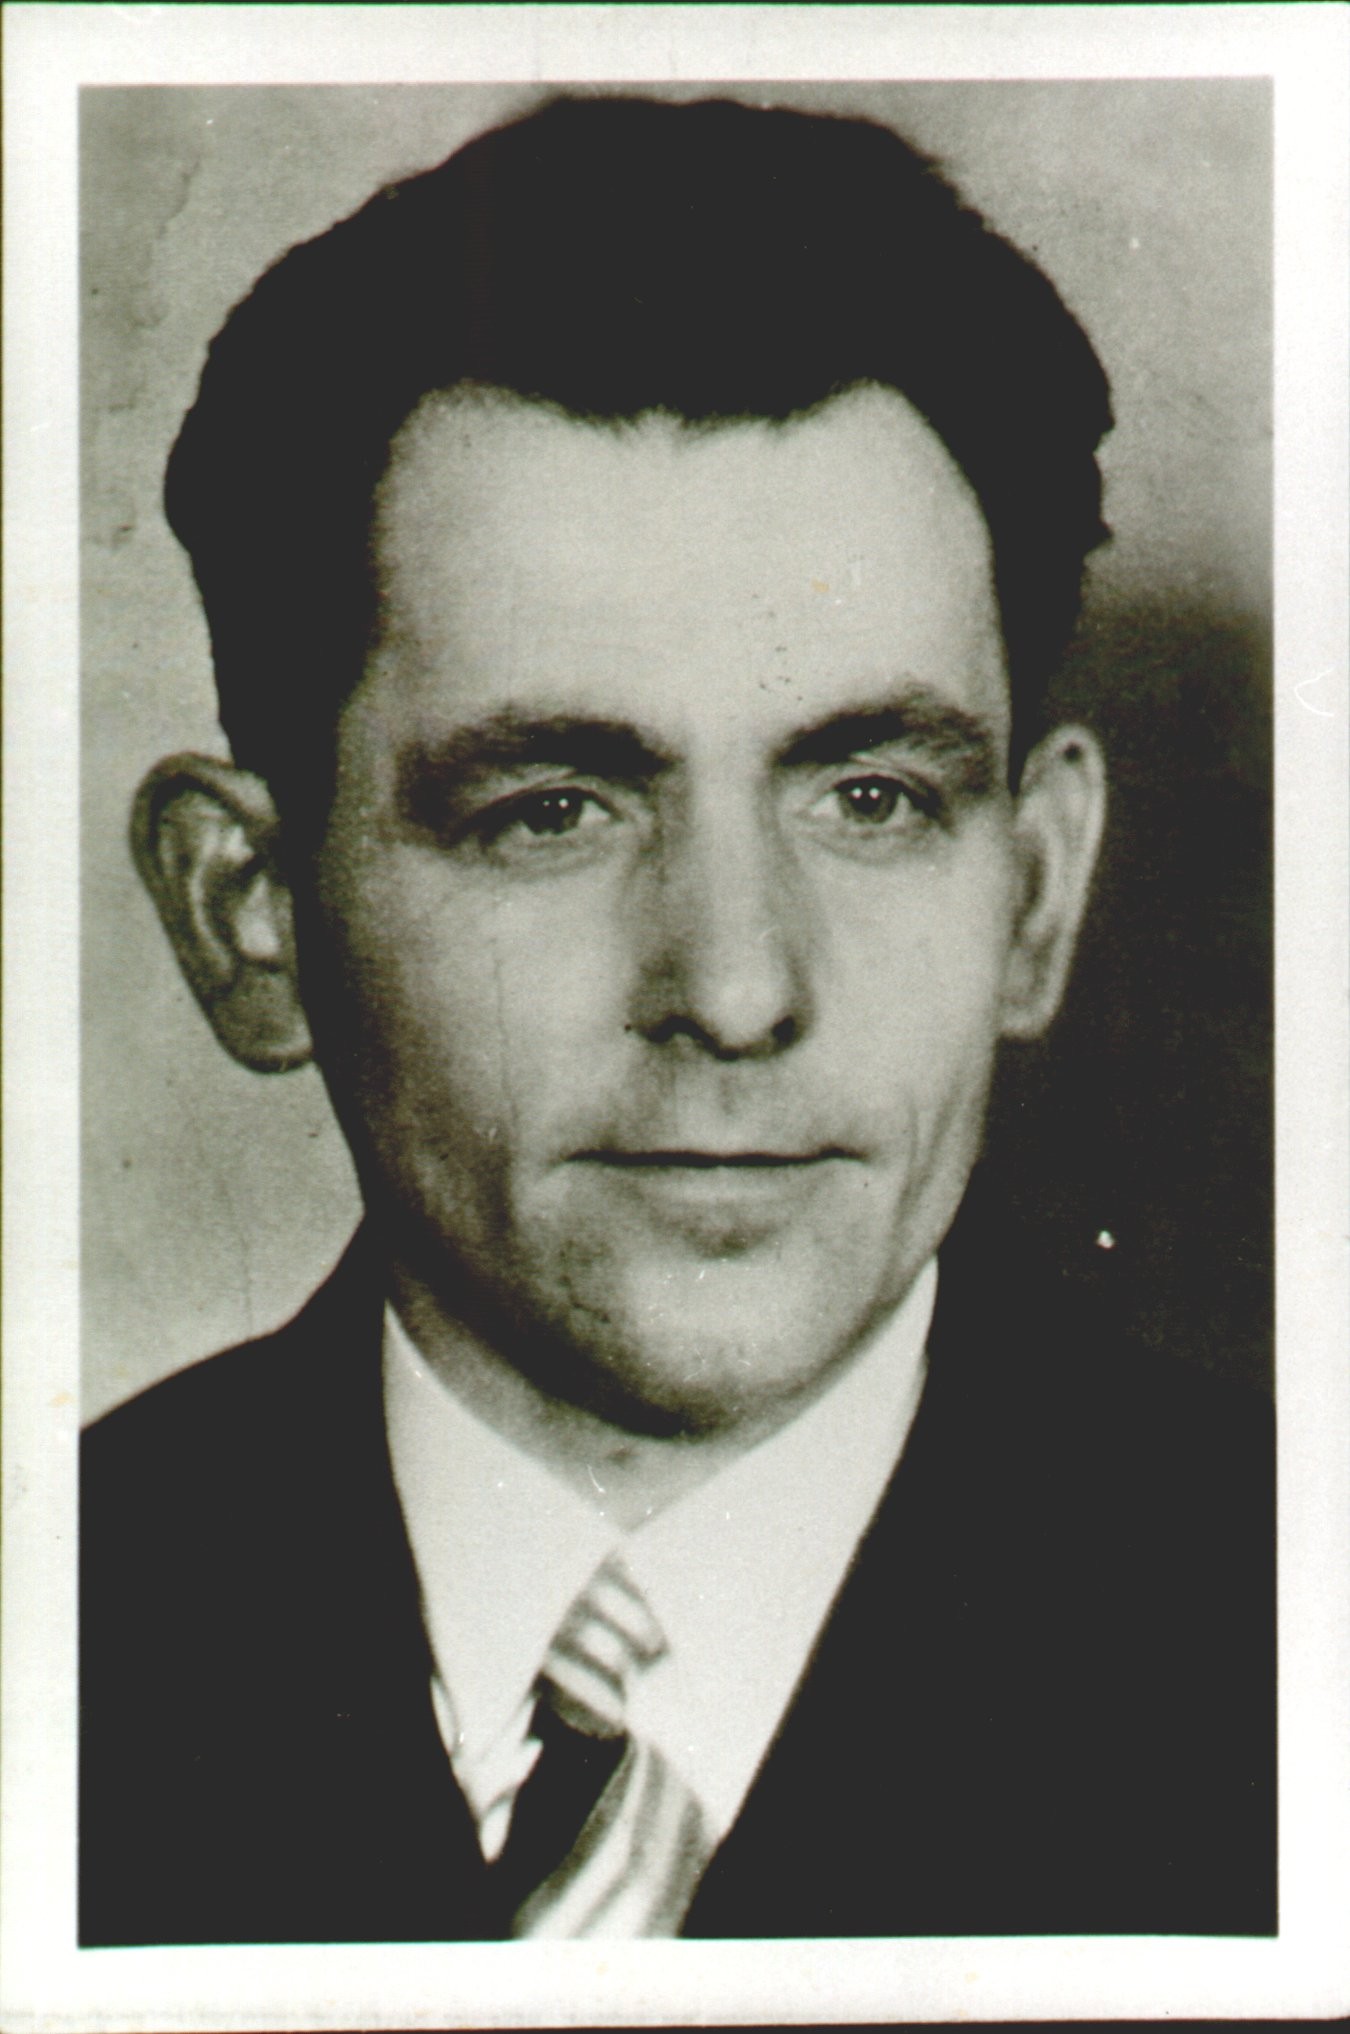 Georg Elser, the man who came closest to killing Hitler